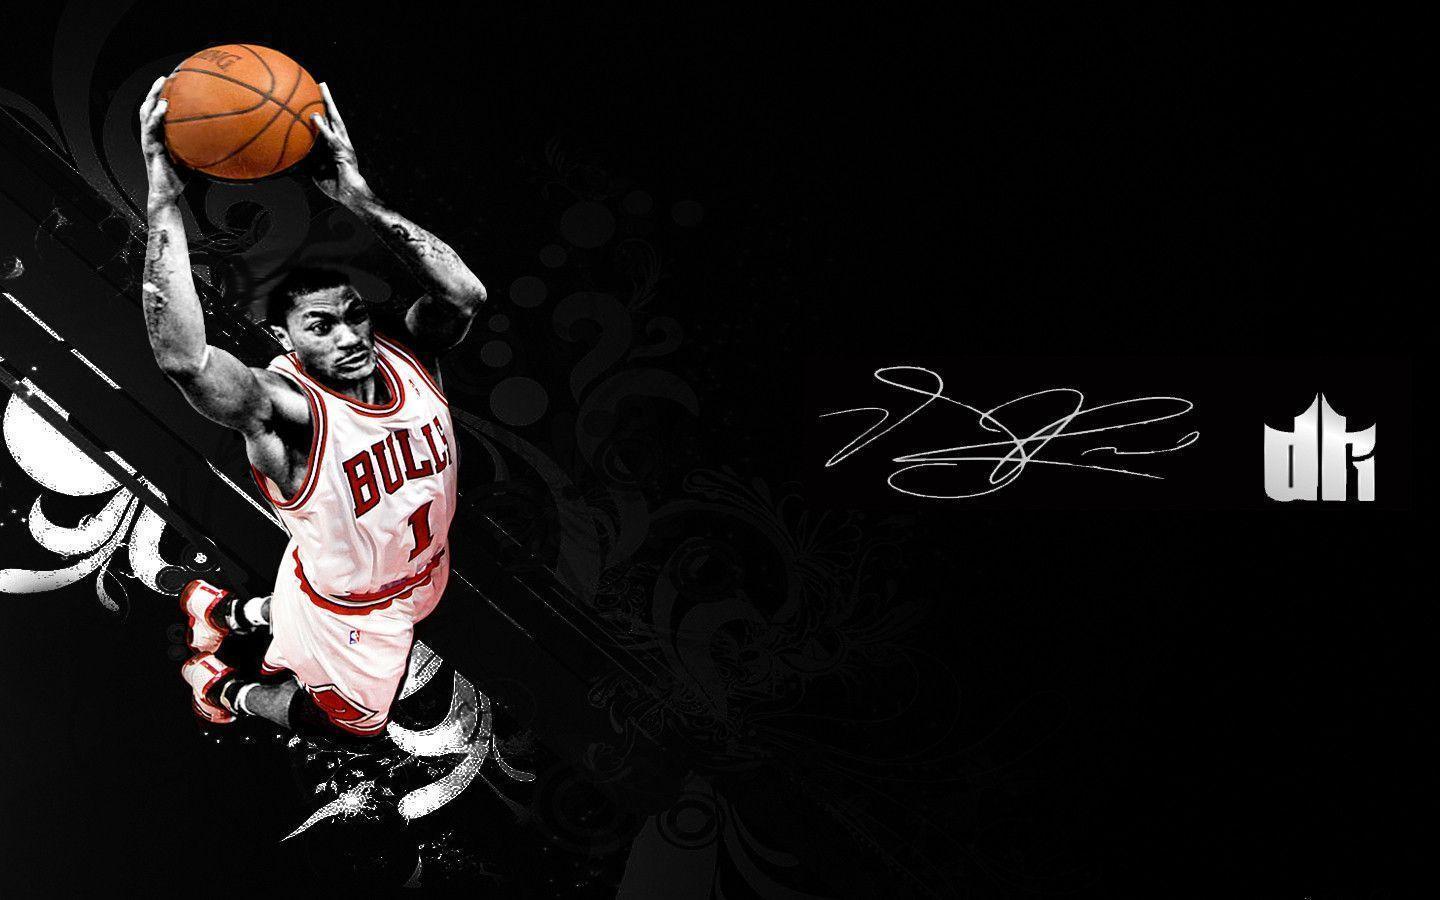 Derrick Rose HD Wallpaper and Background